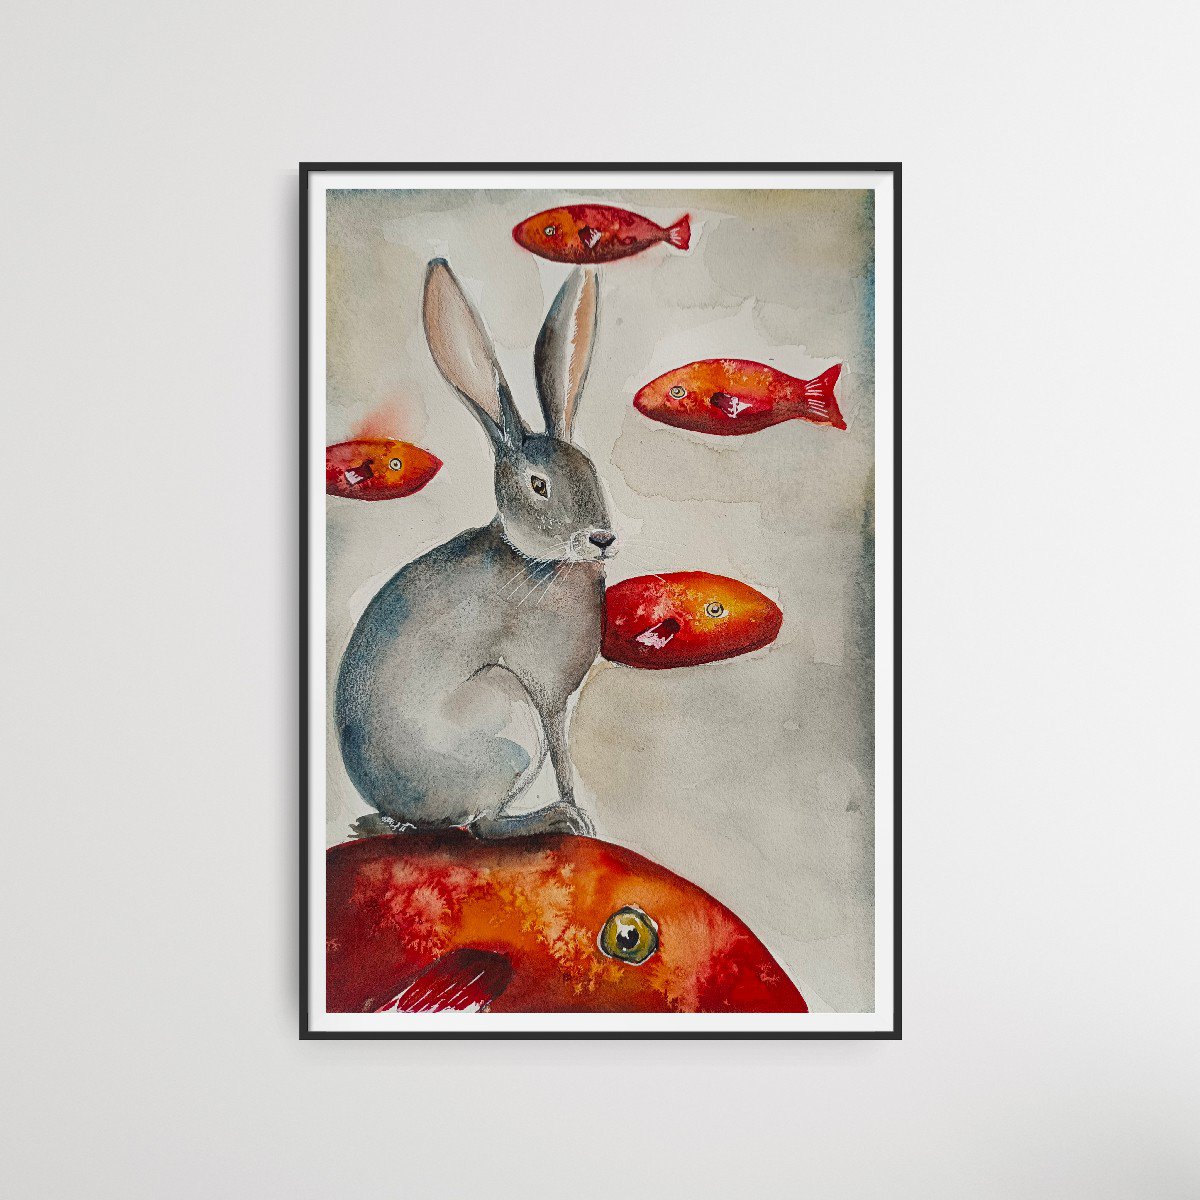 Rabbit with red fishes by Evgenia Smirnova